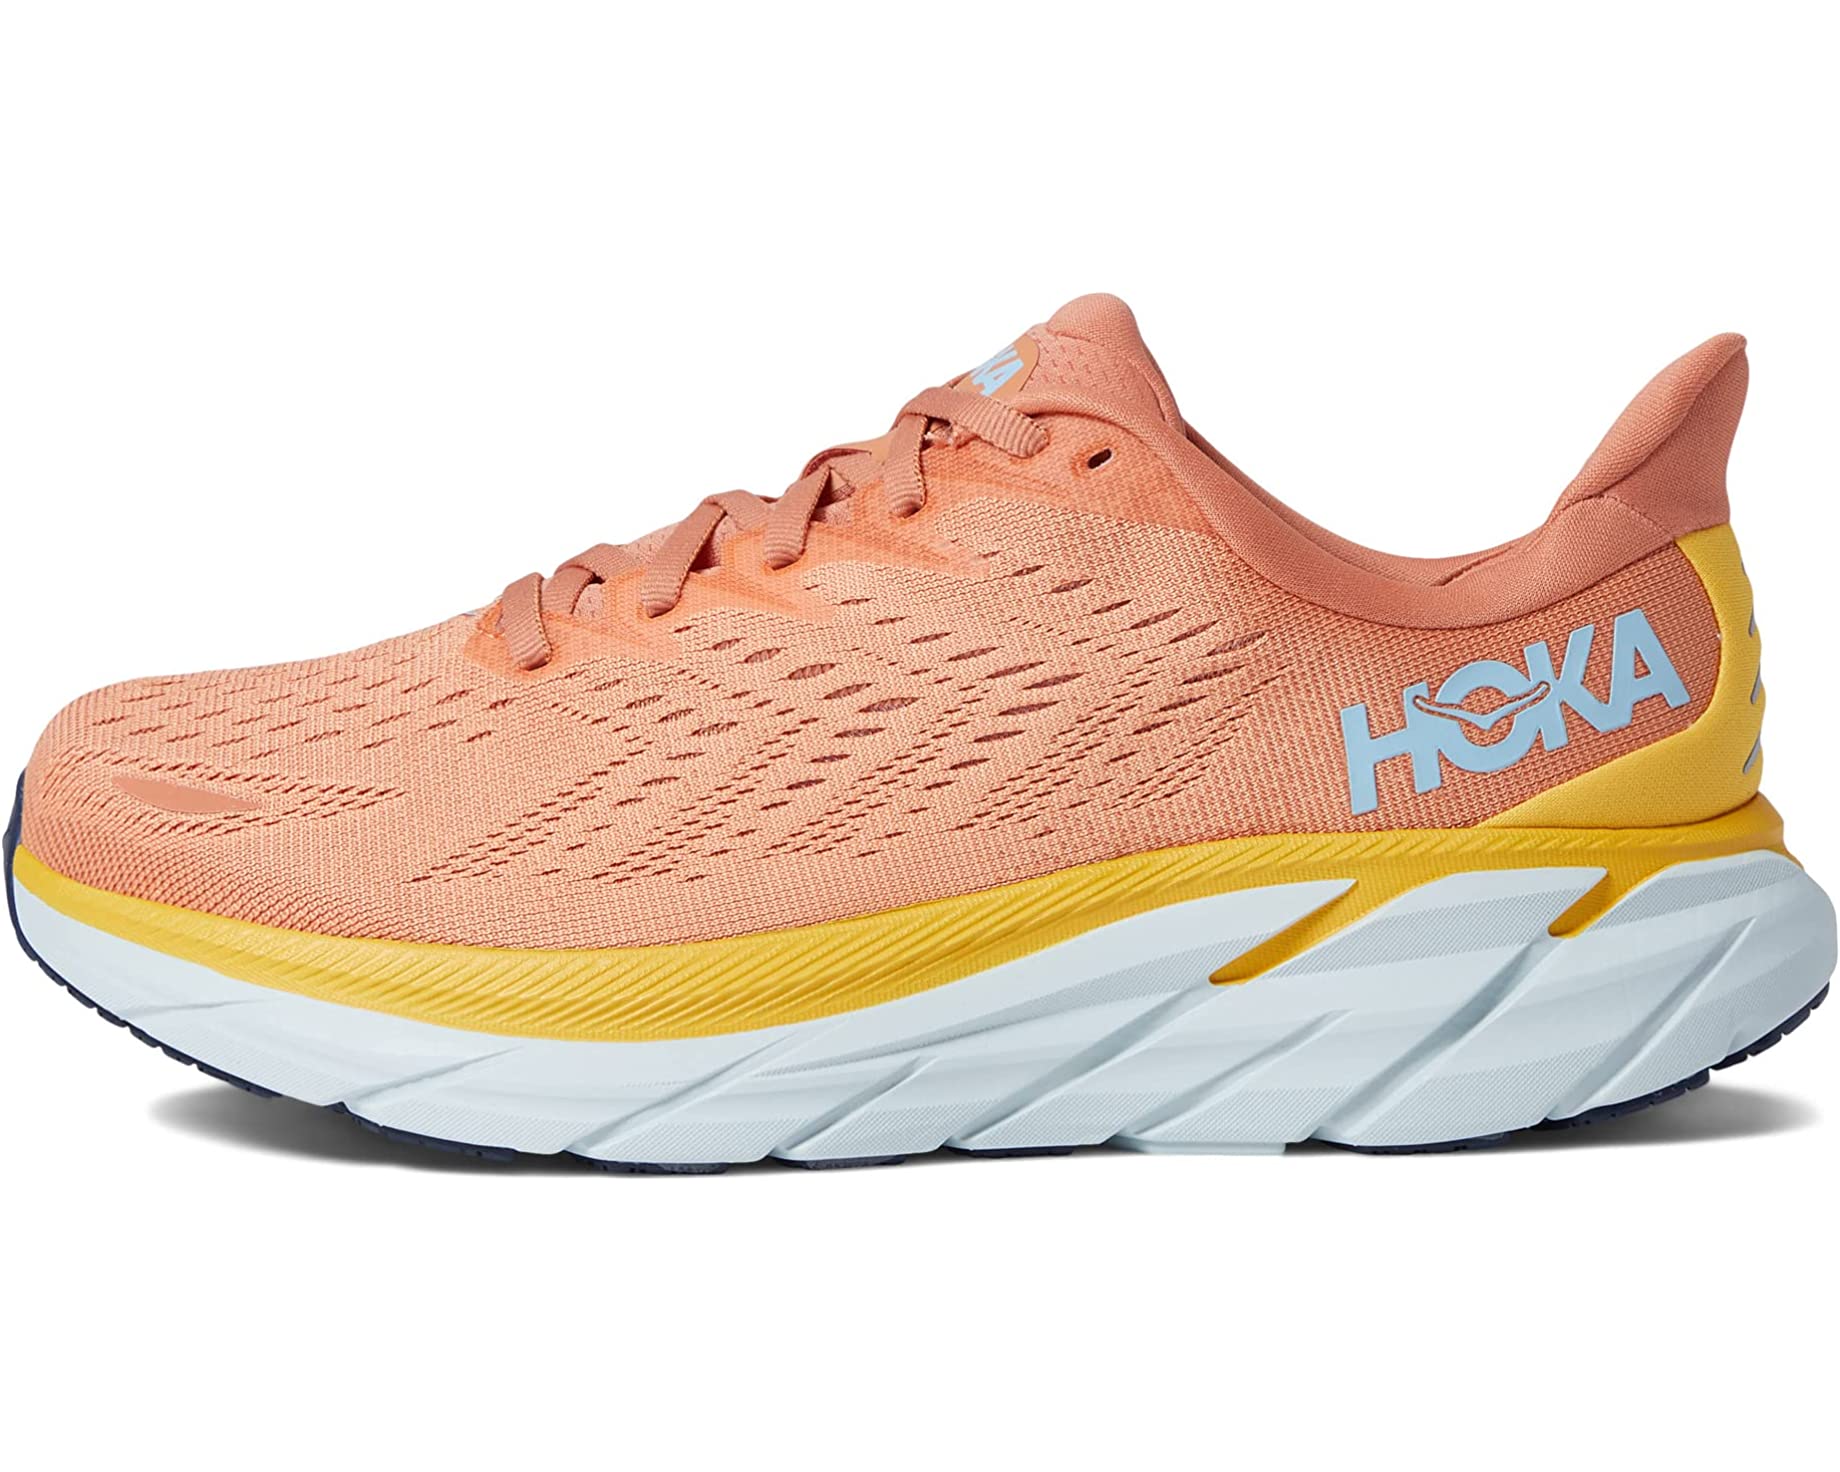 Hoka Clifton 8-Women Running Shoes- Coral - Size 8 M US